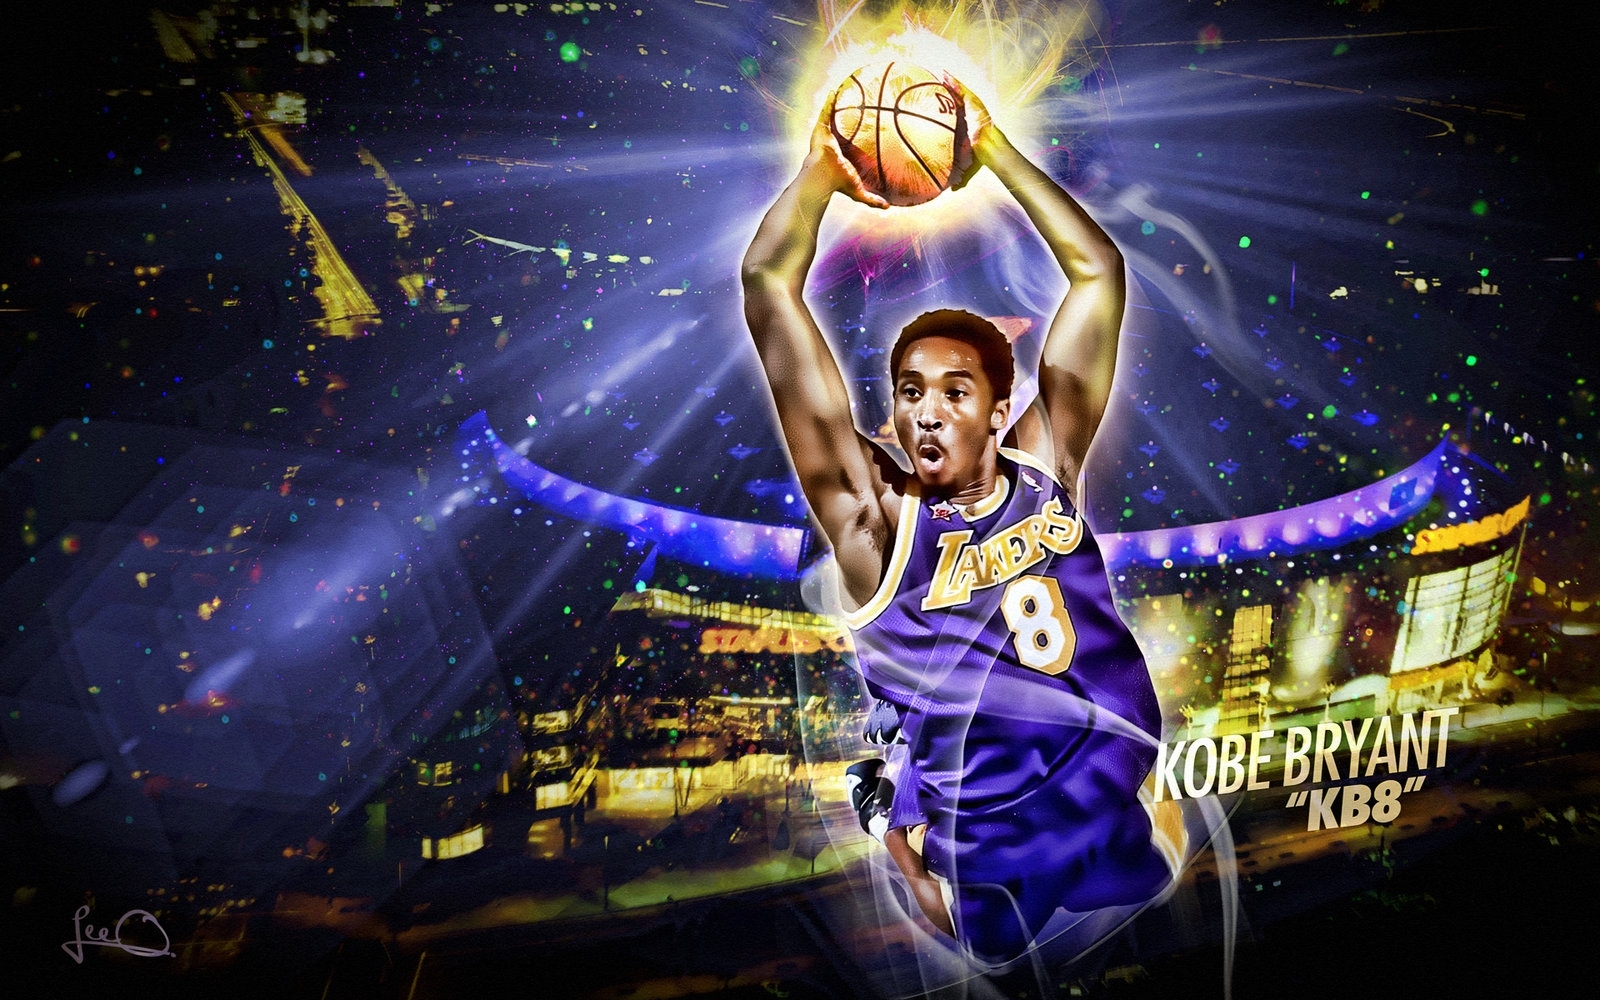 10 Best And Most Recent Nba Kobe Bryant Wallpaper for Desktop Computer with...